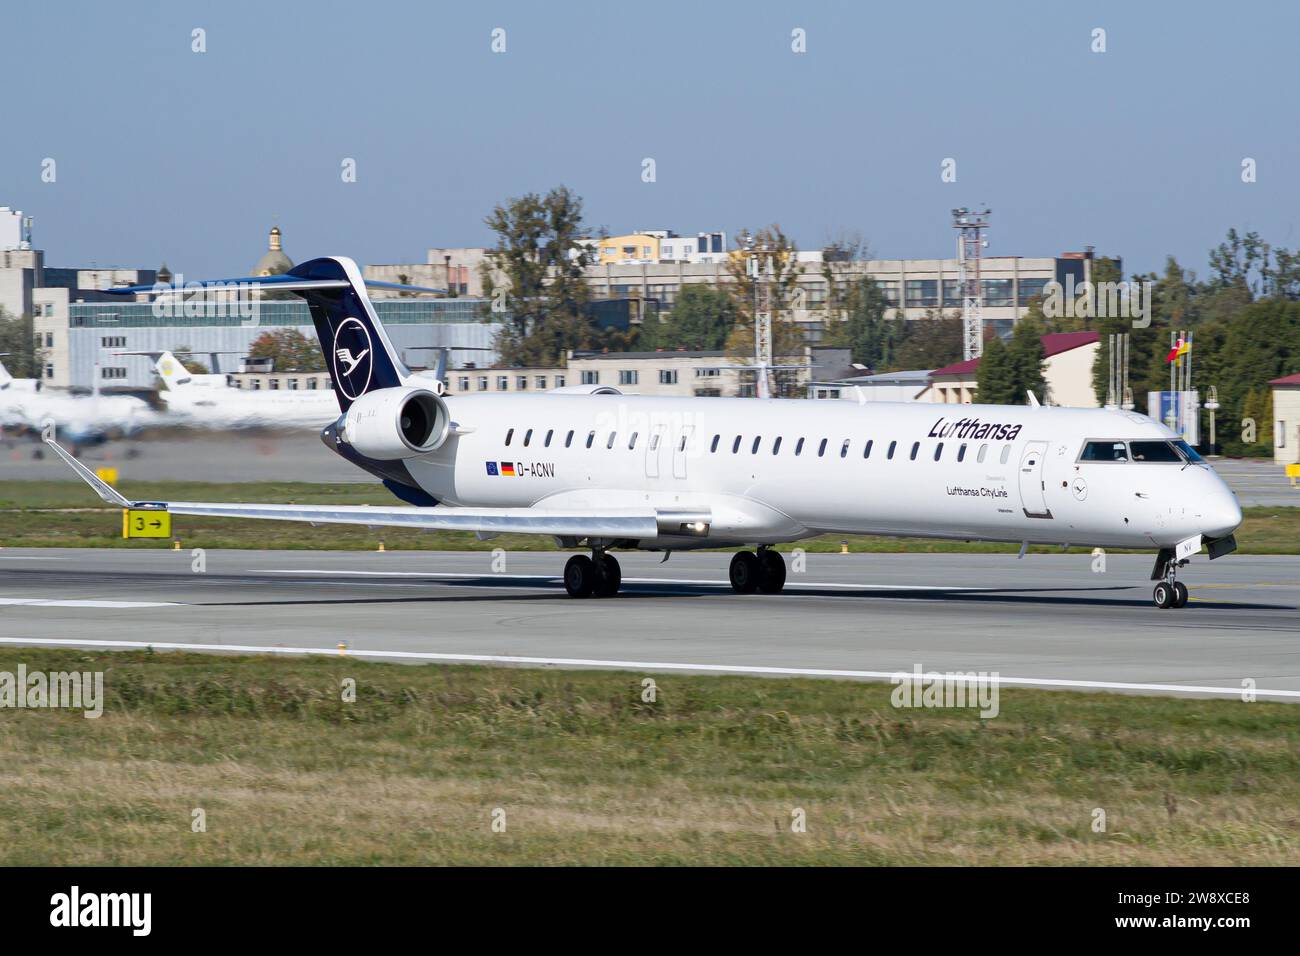 Lufthansa Bombardier CRJ-900LR taking off from Lviv for a flight to Munich Stock Photo